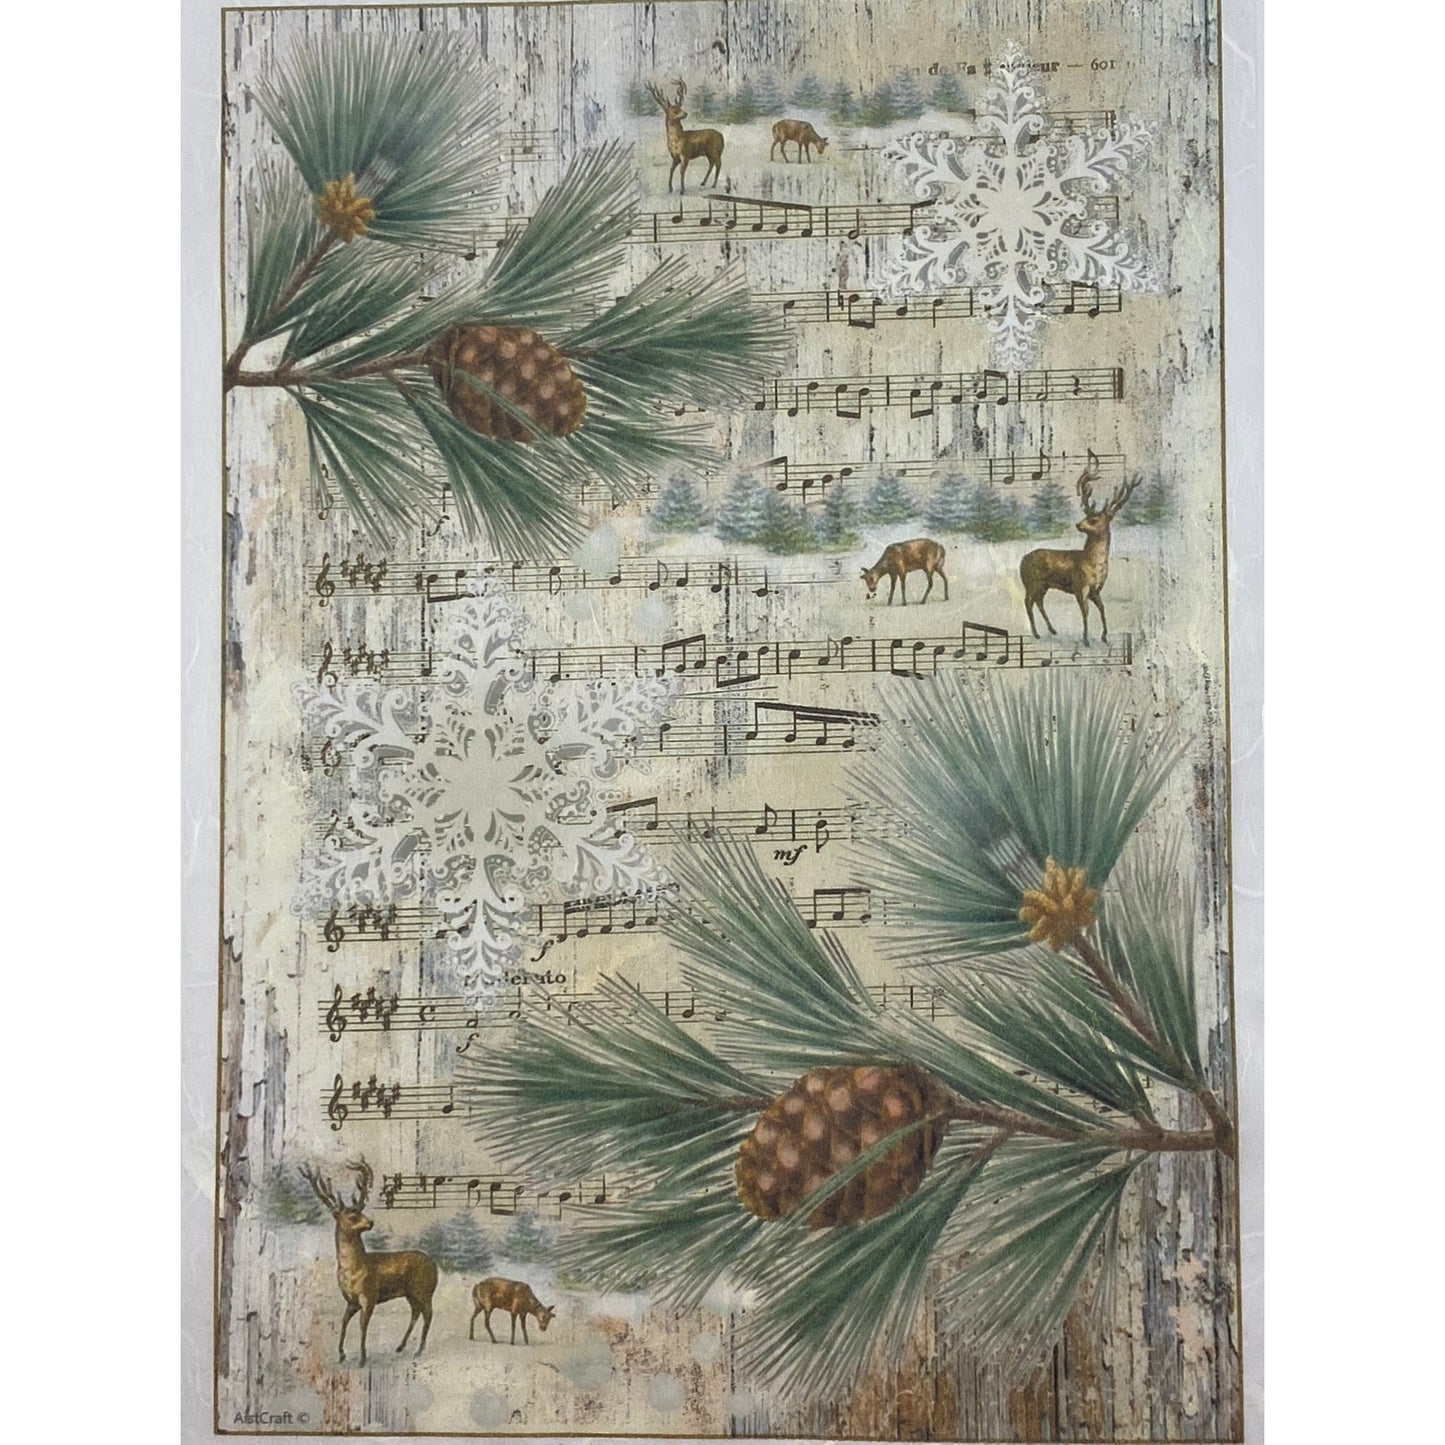 21297 - Decoupage Rice Paper - Deer, Music Sheet, Snowflakes, Winter, Background